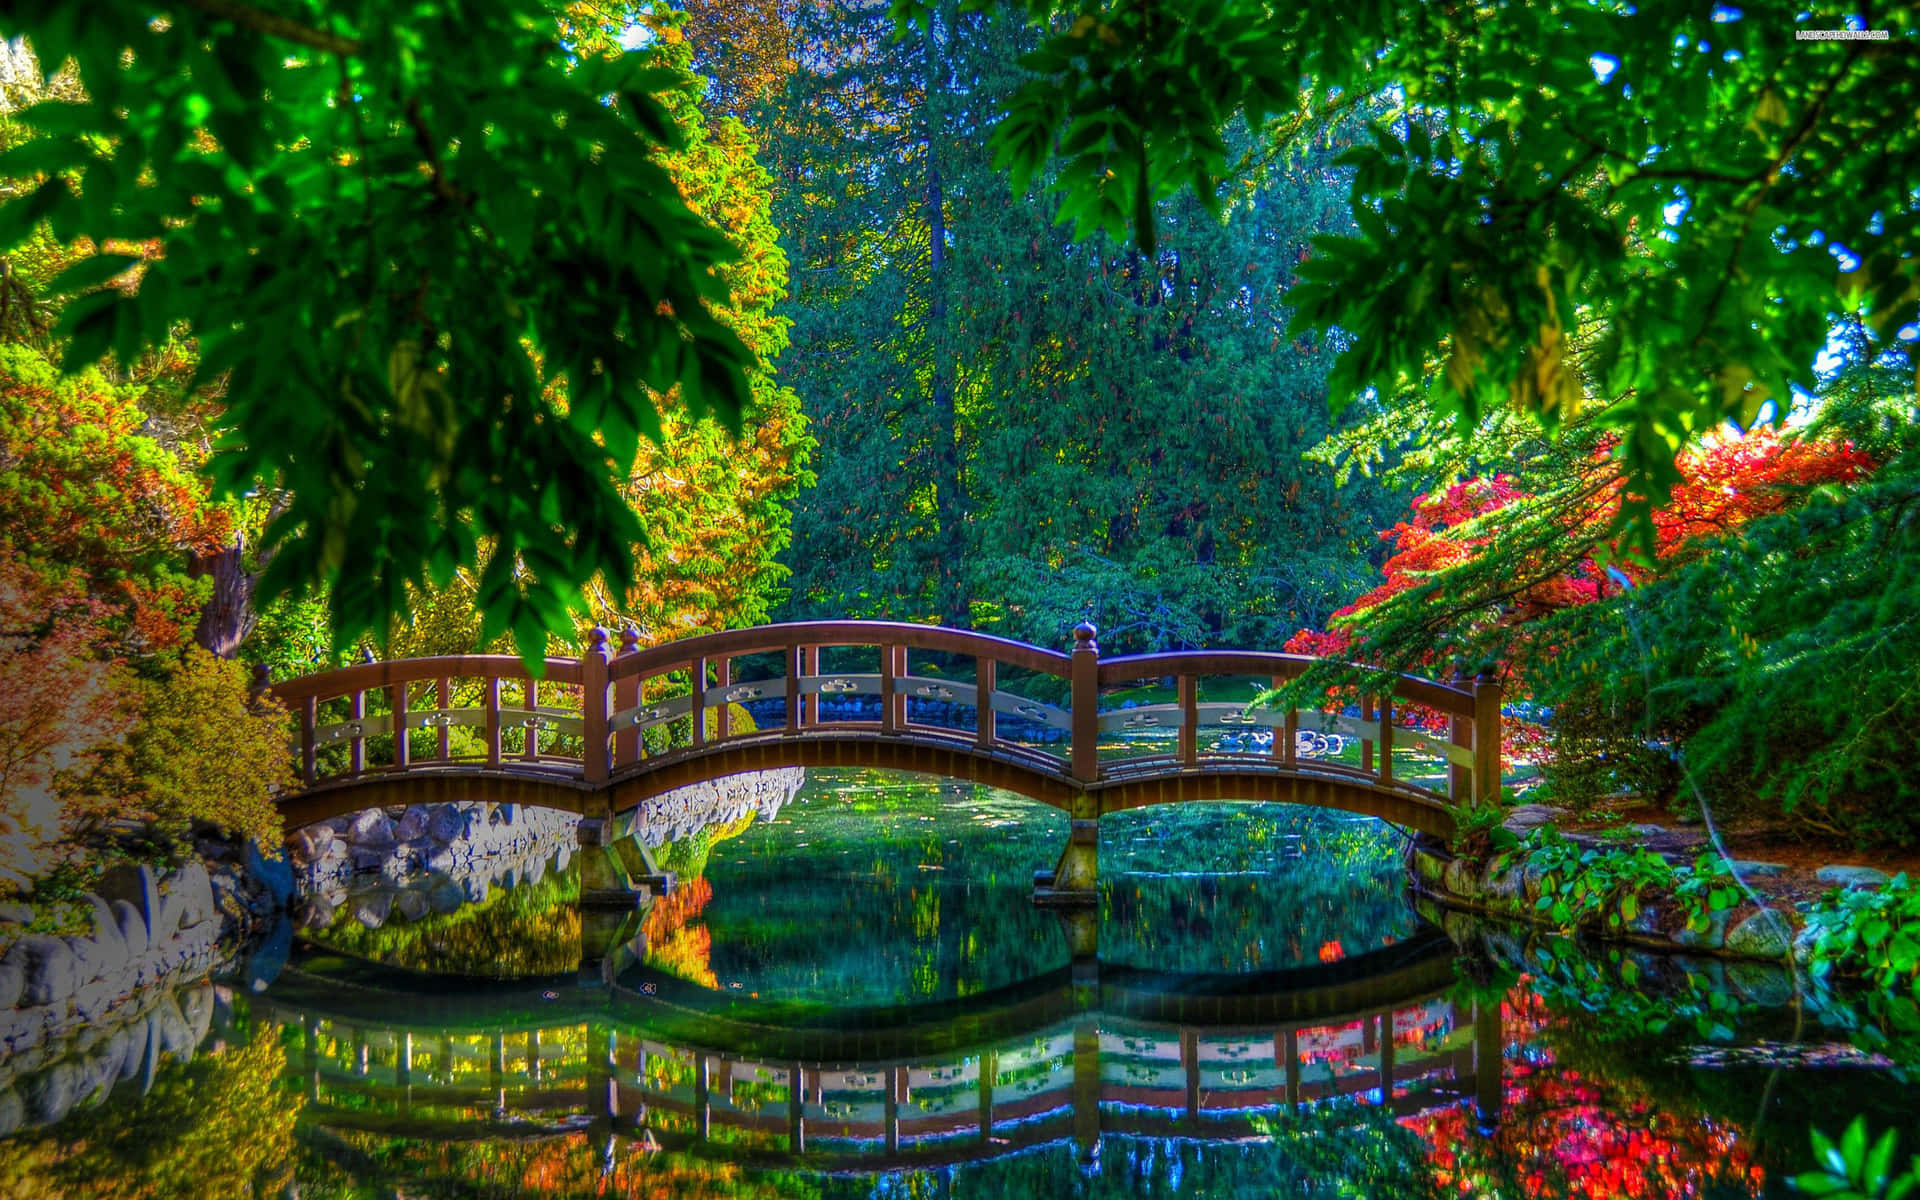 A Wooden Bridge Surrounded By Green Trees And Flowers